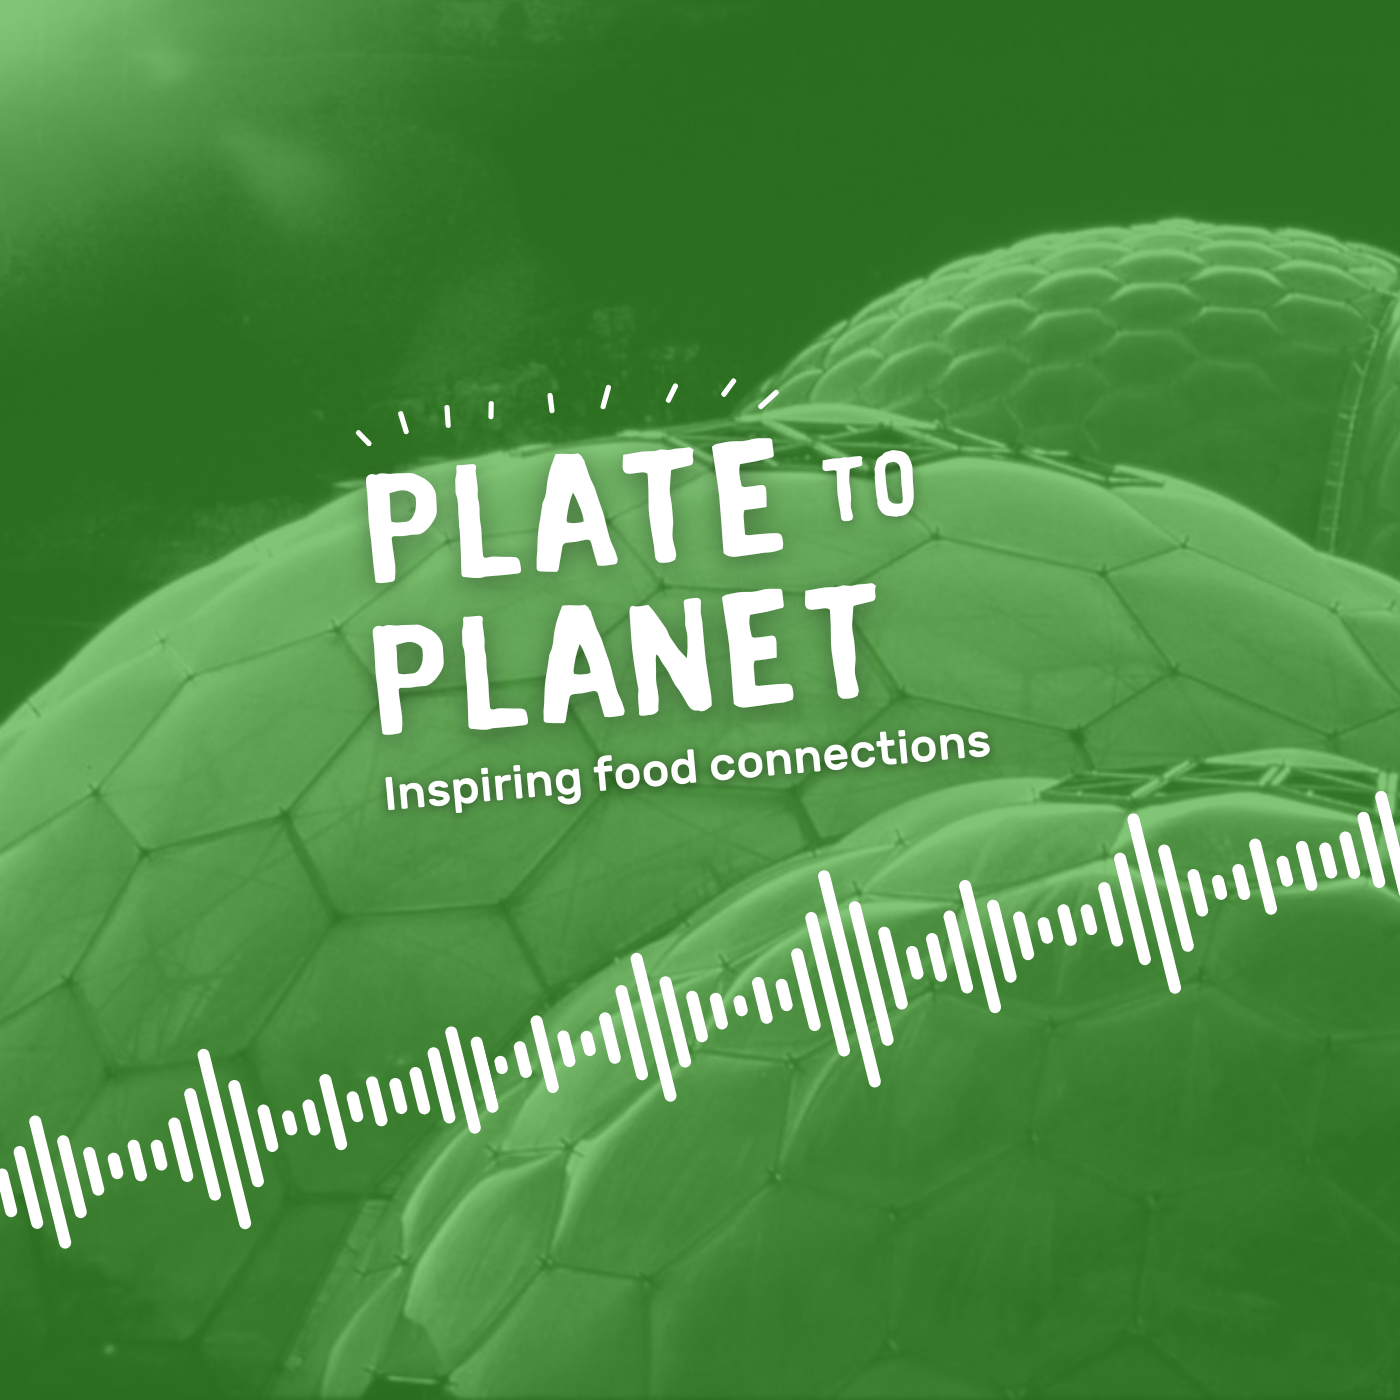 Plate to planet graphic